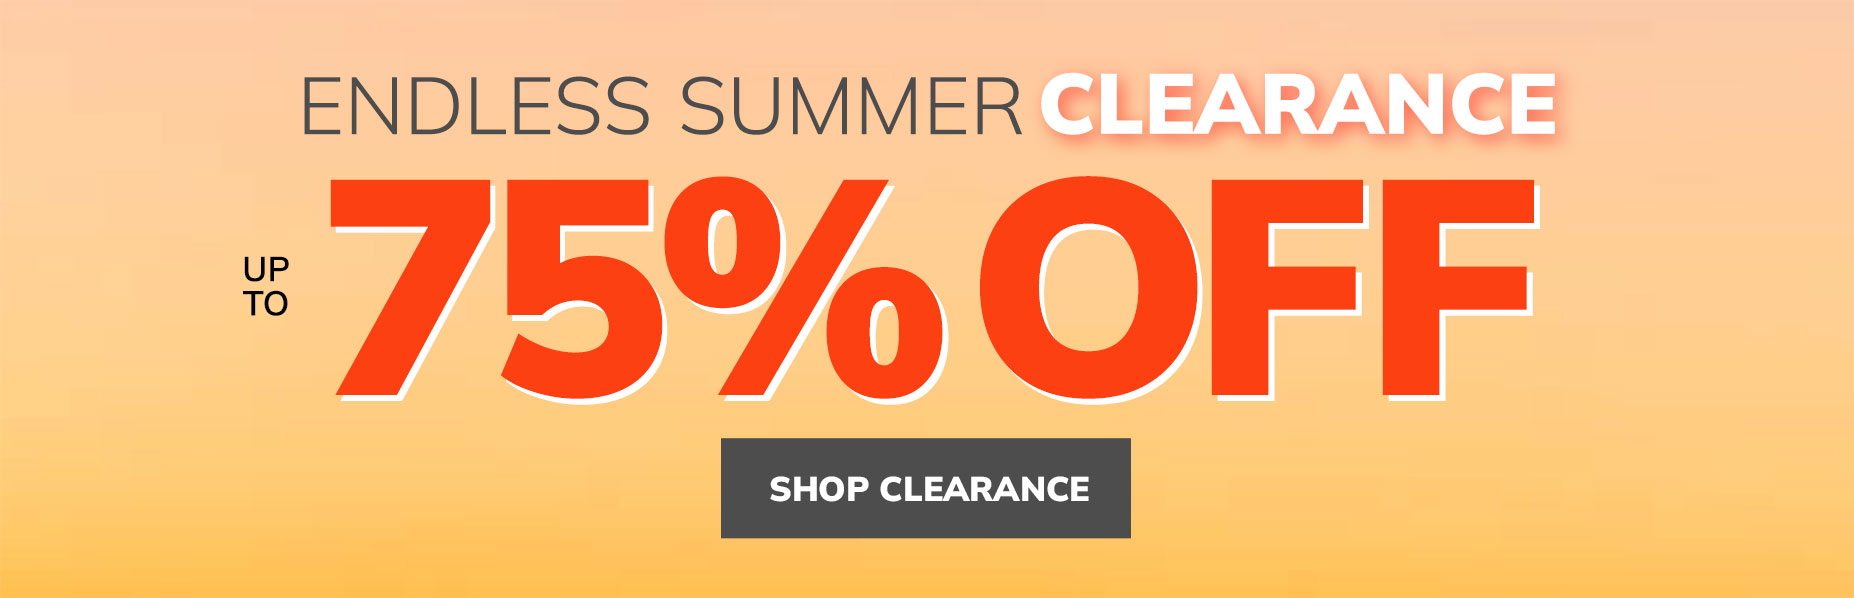 endless summer clearance up to 75% off